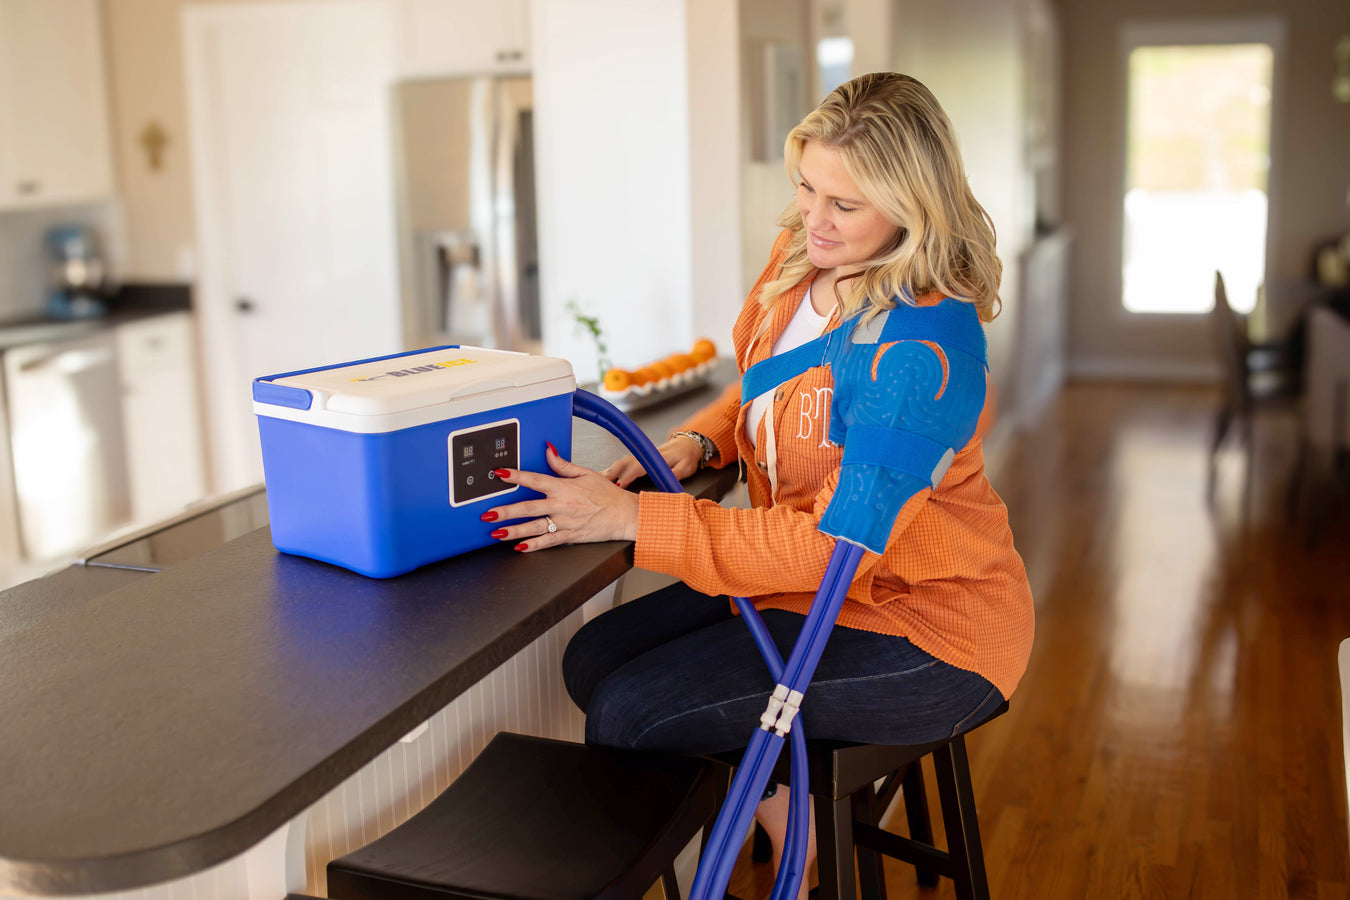 Brittany Jackson using a Brace Direct blue ice therapy machine while seated at a kitchen counter